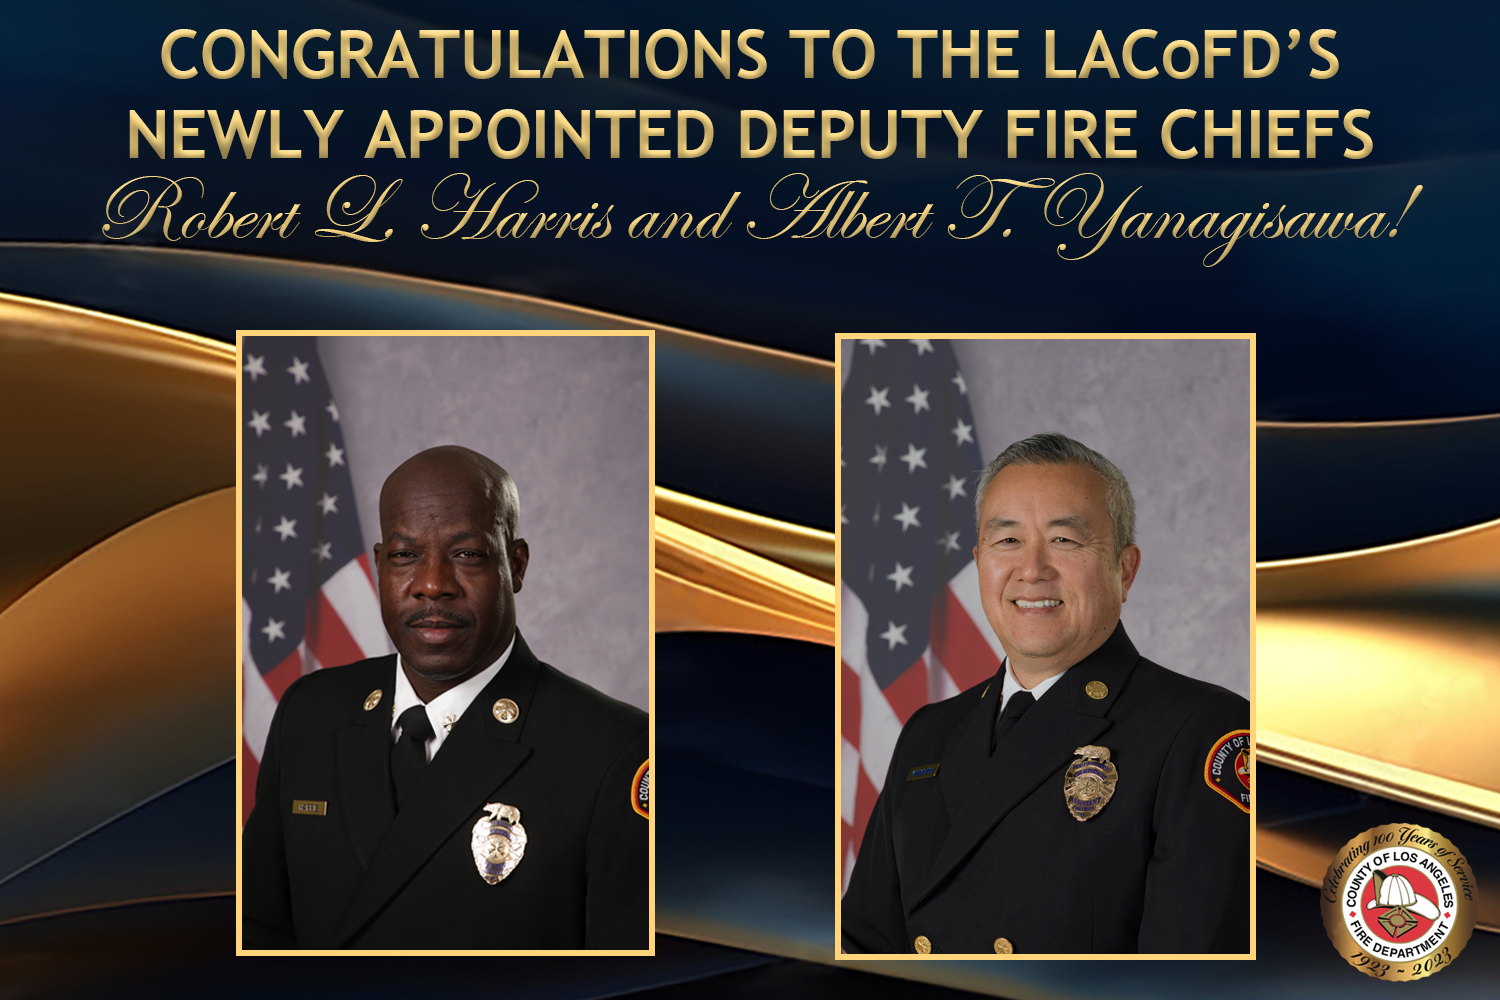 On November 7, 2023, the County of Los Angeles Fire Department (LACoFD) announced the Board of Supervisors approved appointments of the following chief officers, Deputy Fire Chiefs Robert L. Harris and Albert T. Yanagisawa.